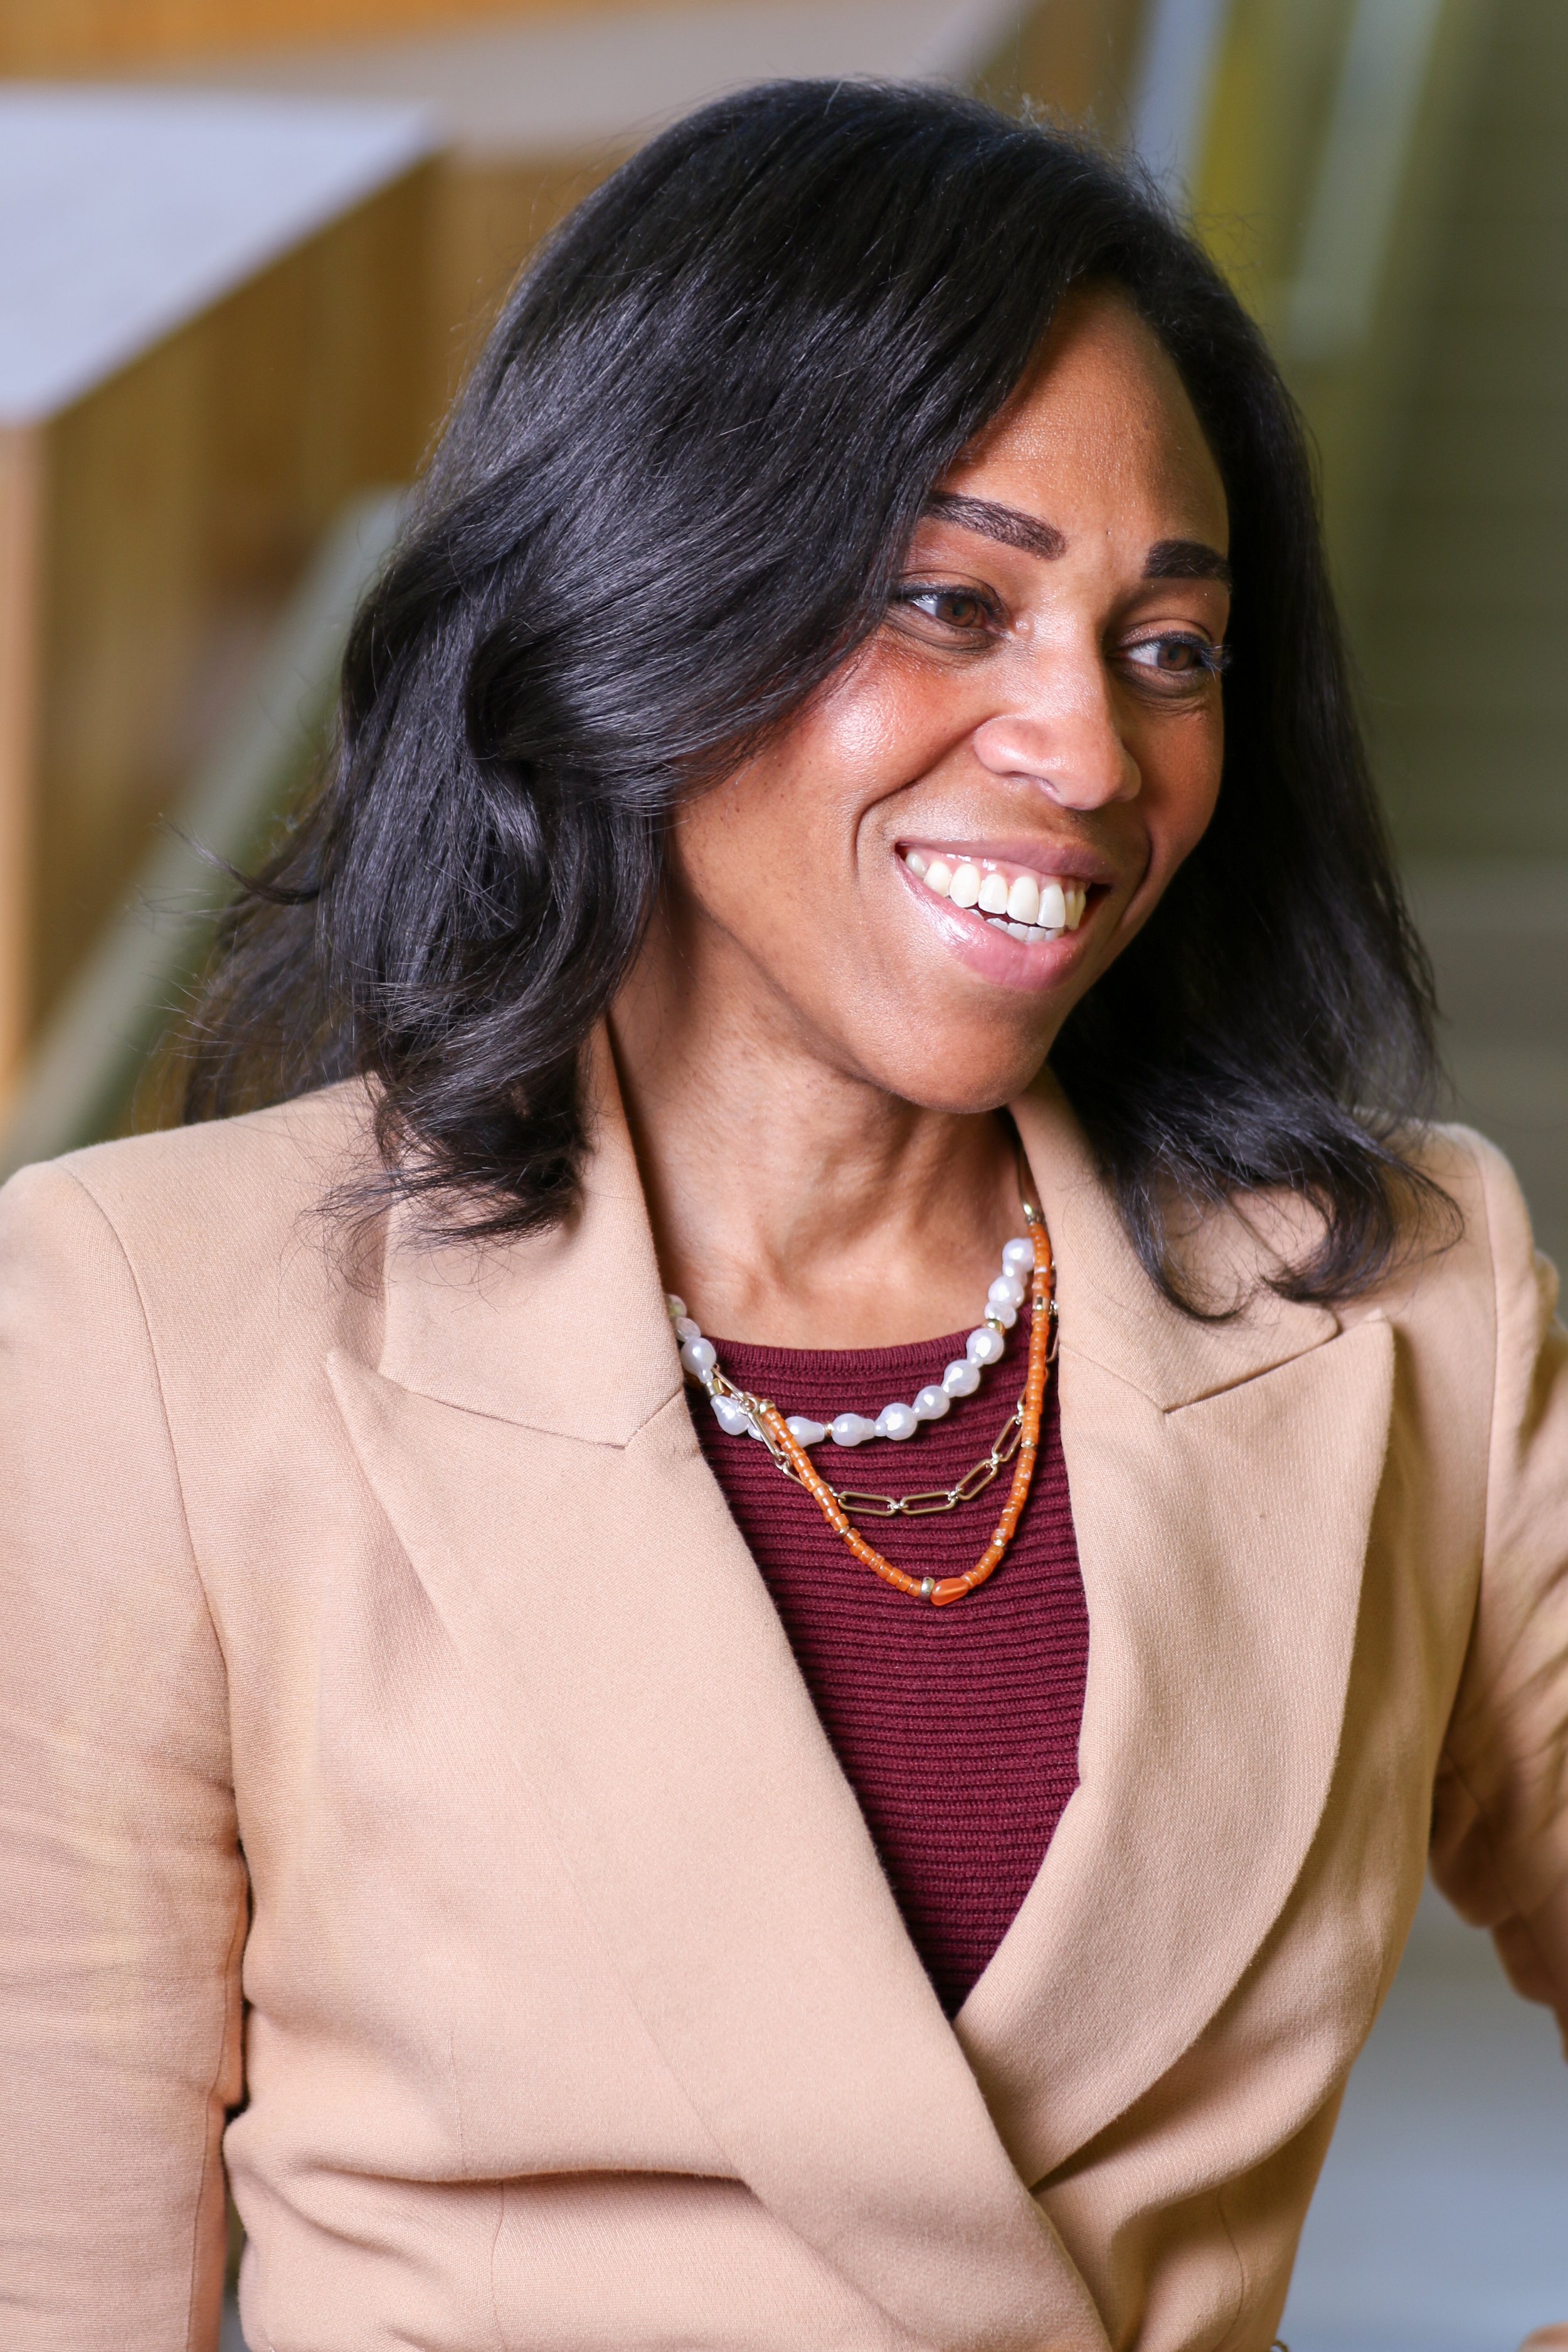  Ashanti Blaize-Hopkins, President of the Society of Professional Journalists and tenured journalism professor at Santa Monica College (SMC) is the newly appointed Associate Dean (interim) for the Center of Media and Design (CMD) at SMC. She stands i